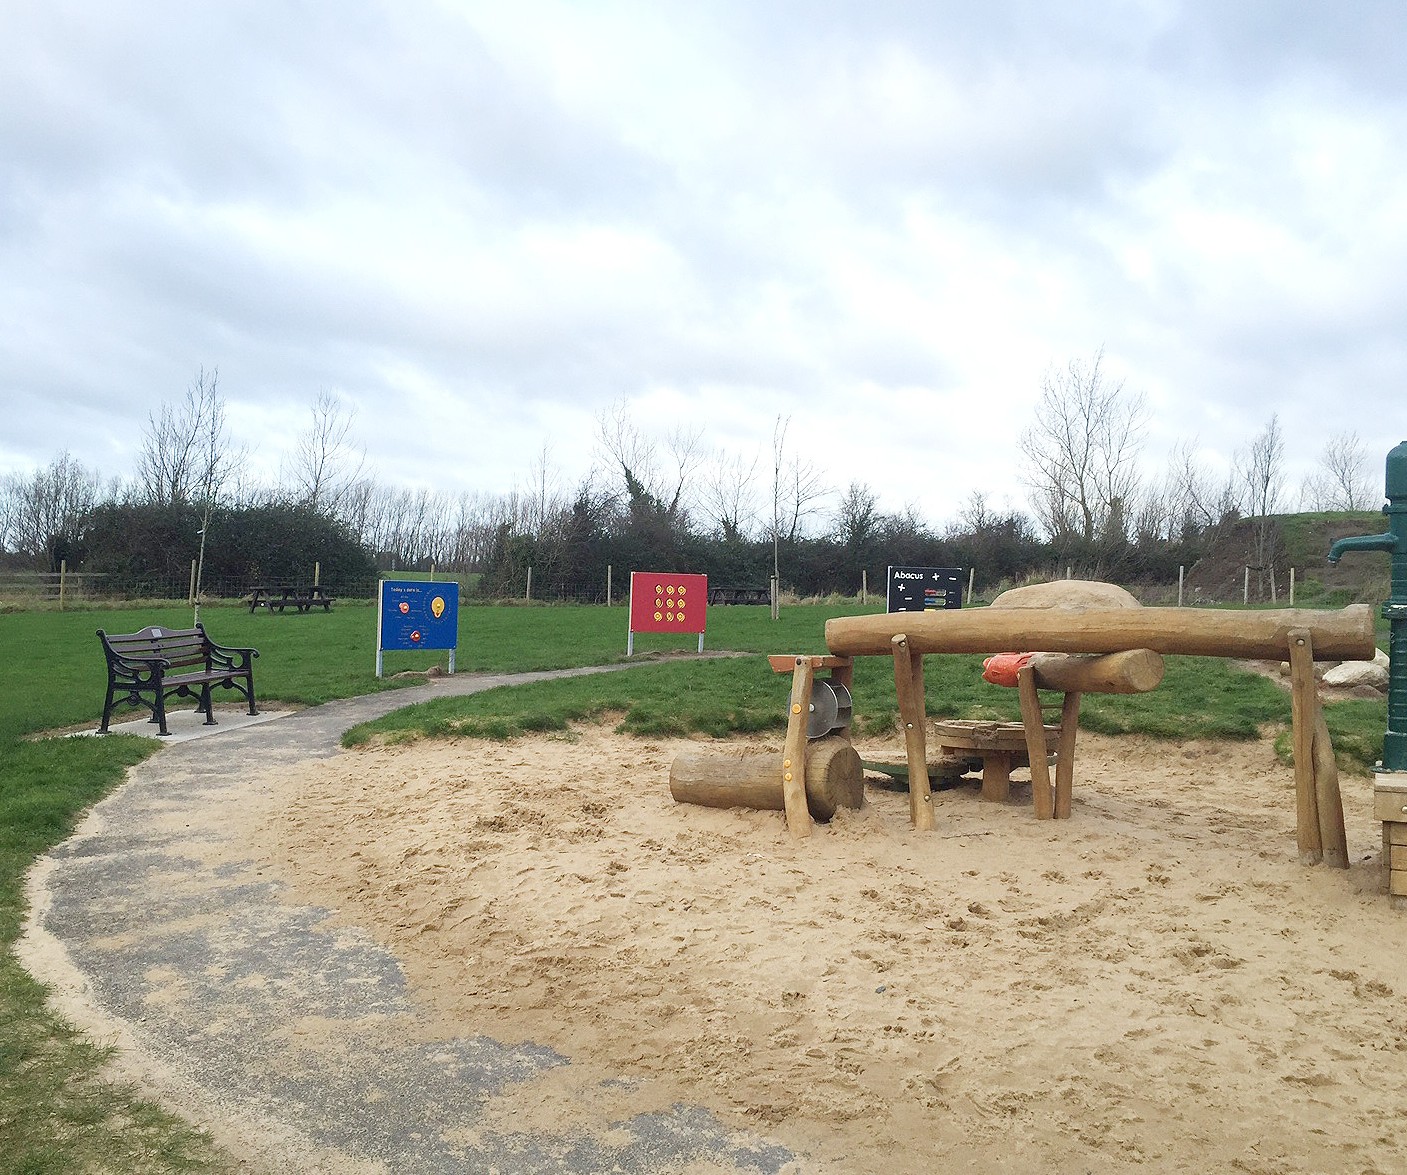 Things to do in County Dublin, Ireland - St. Catherine's Park - YourDaysOut - Photo 1